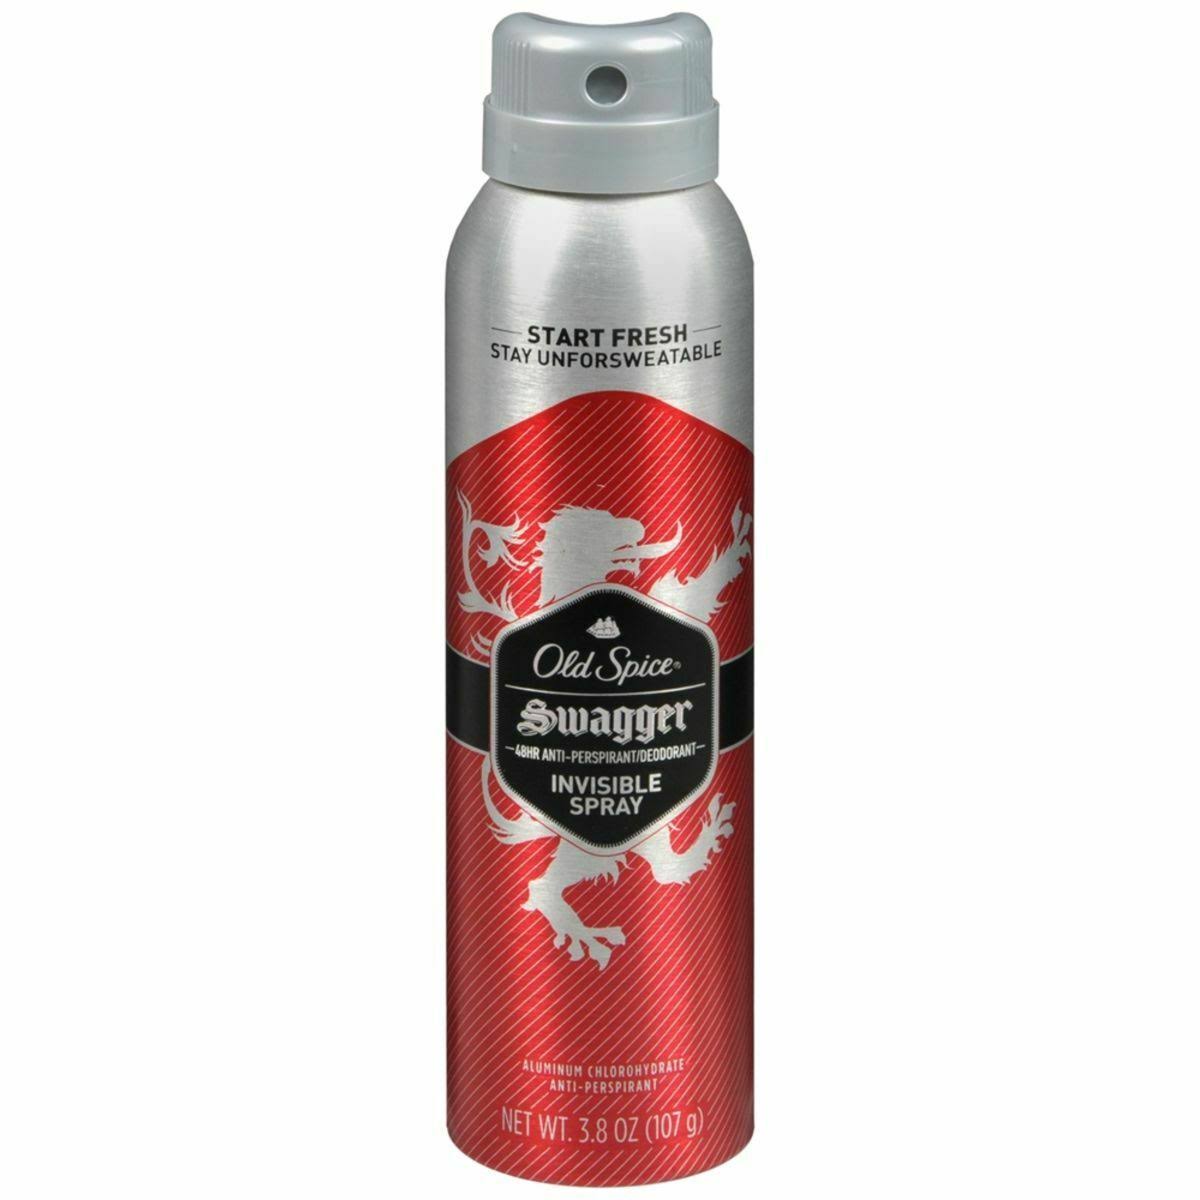 Old Spice Invisible Spray Antiperspirant and Deodorant - Swagger, 3.8oz